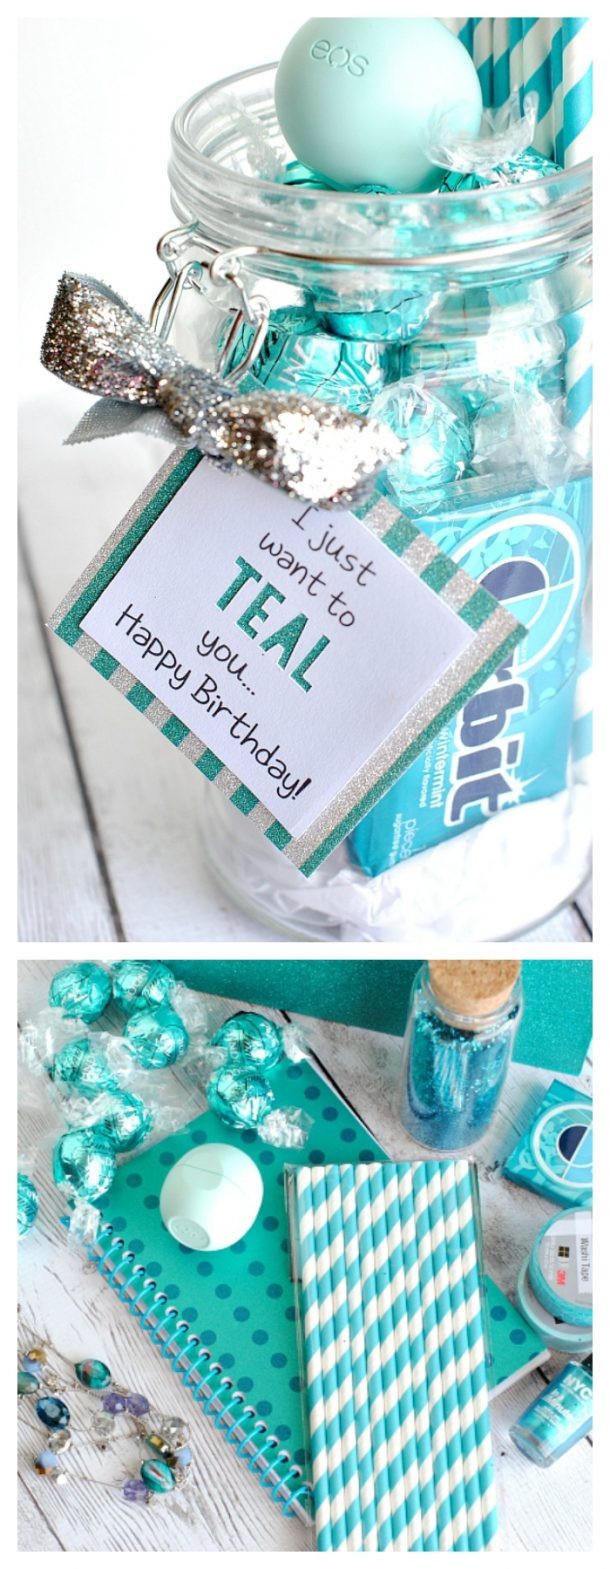 Diy Thank You Gift Basket Ideas
 Do it Yourself Gift Basket Ideas for All Occasions